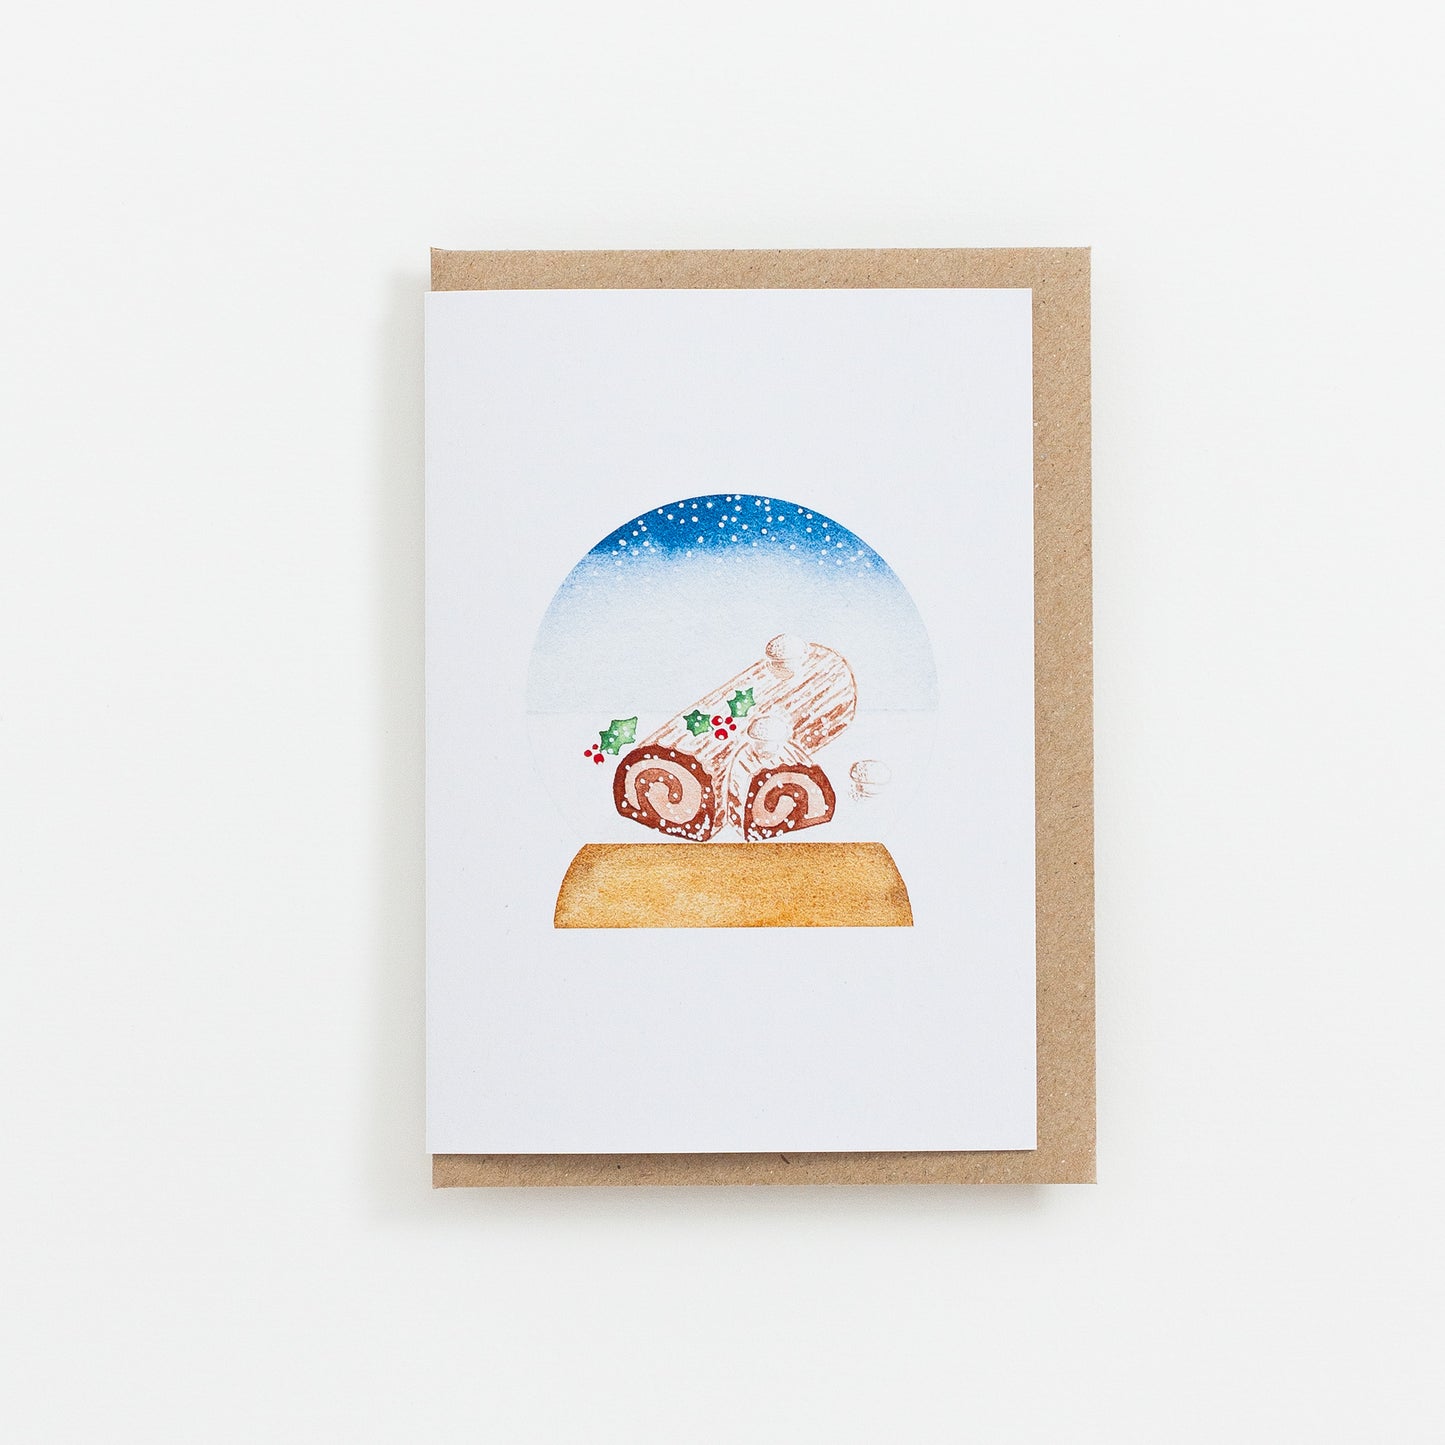 A festive food Snow Globe card designed from handmade watercolour painting. The illustration is a yule log (also known as bûche de Noël in France) topped with meringue mushrooms, cocoa powder and holly branches.